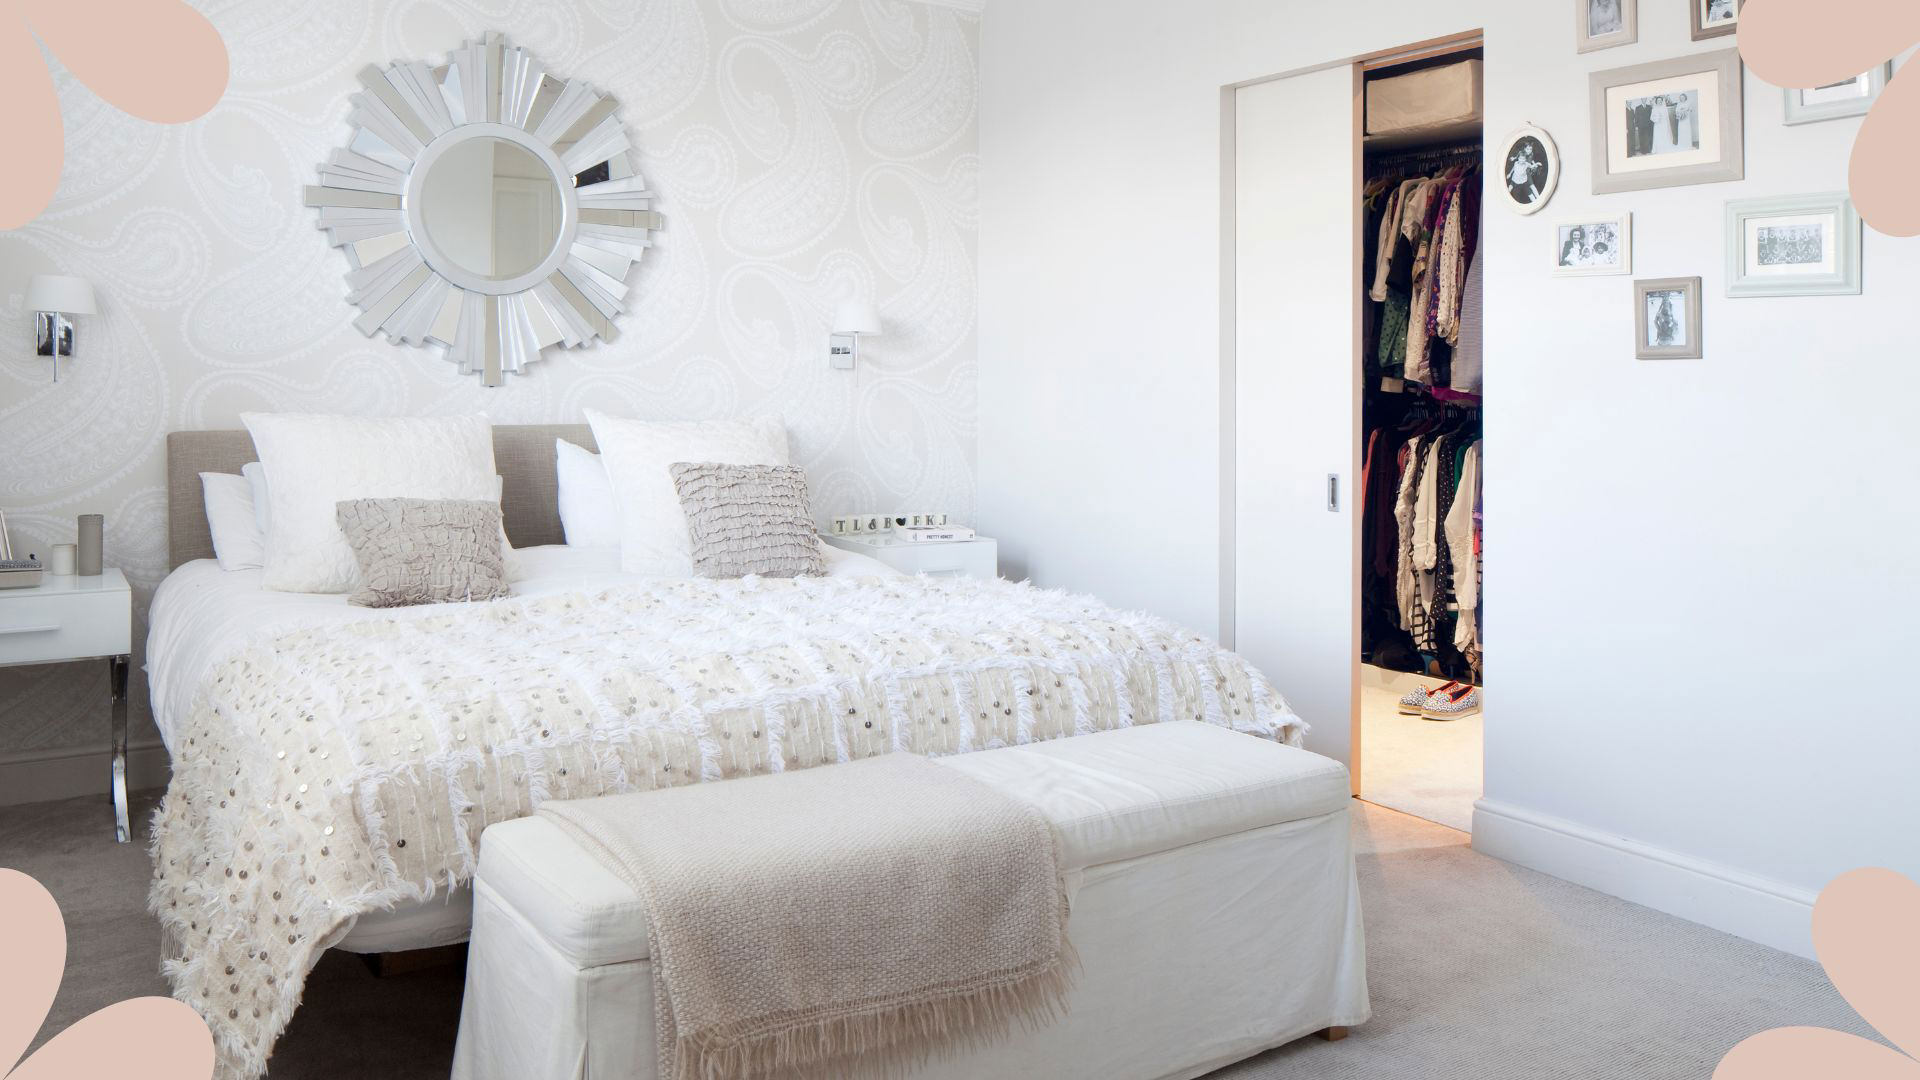 How to organize a small closet with lots of clothes - 10 clever tips ...